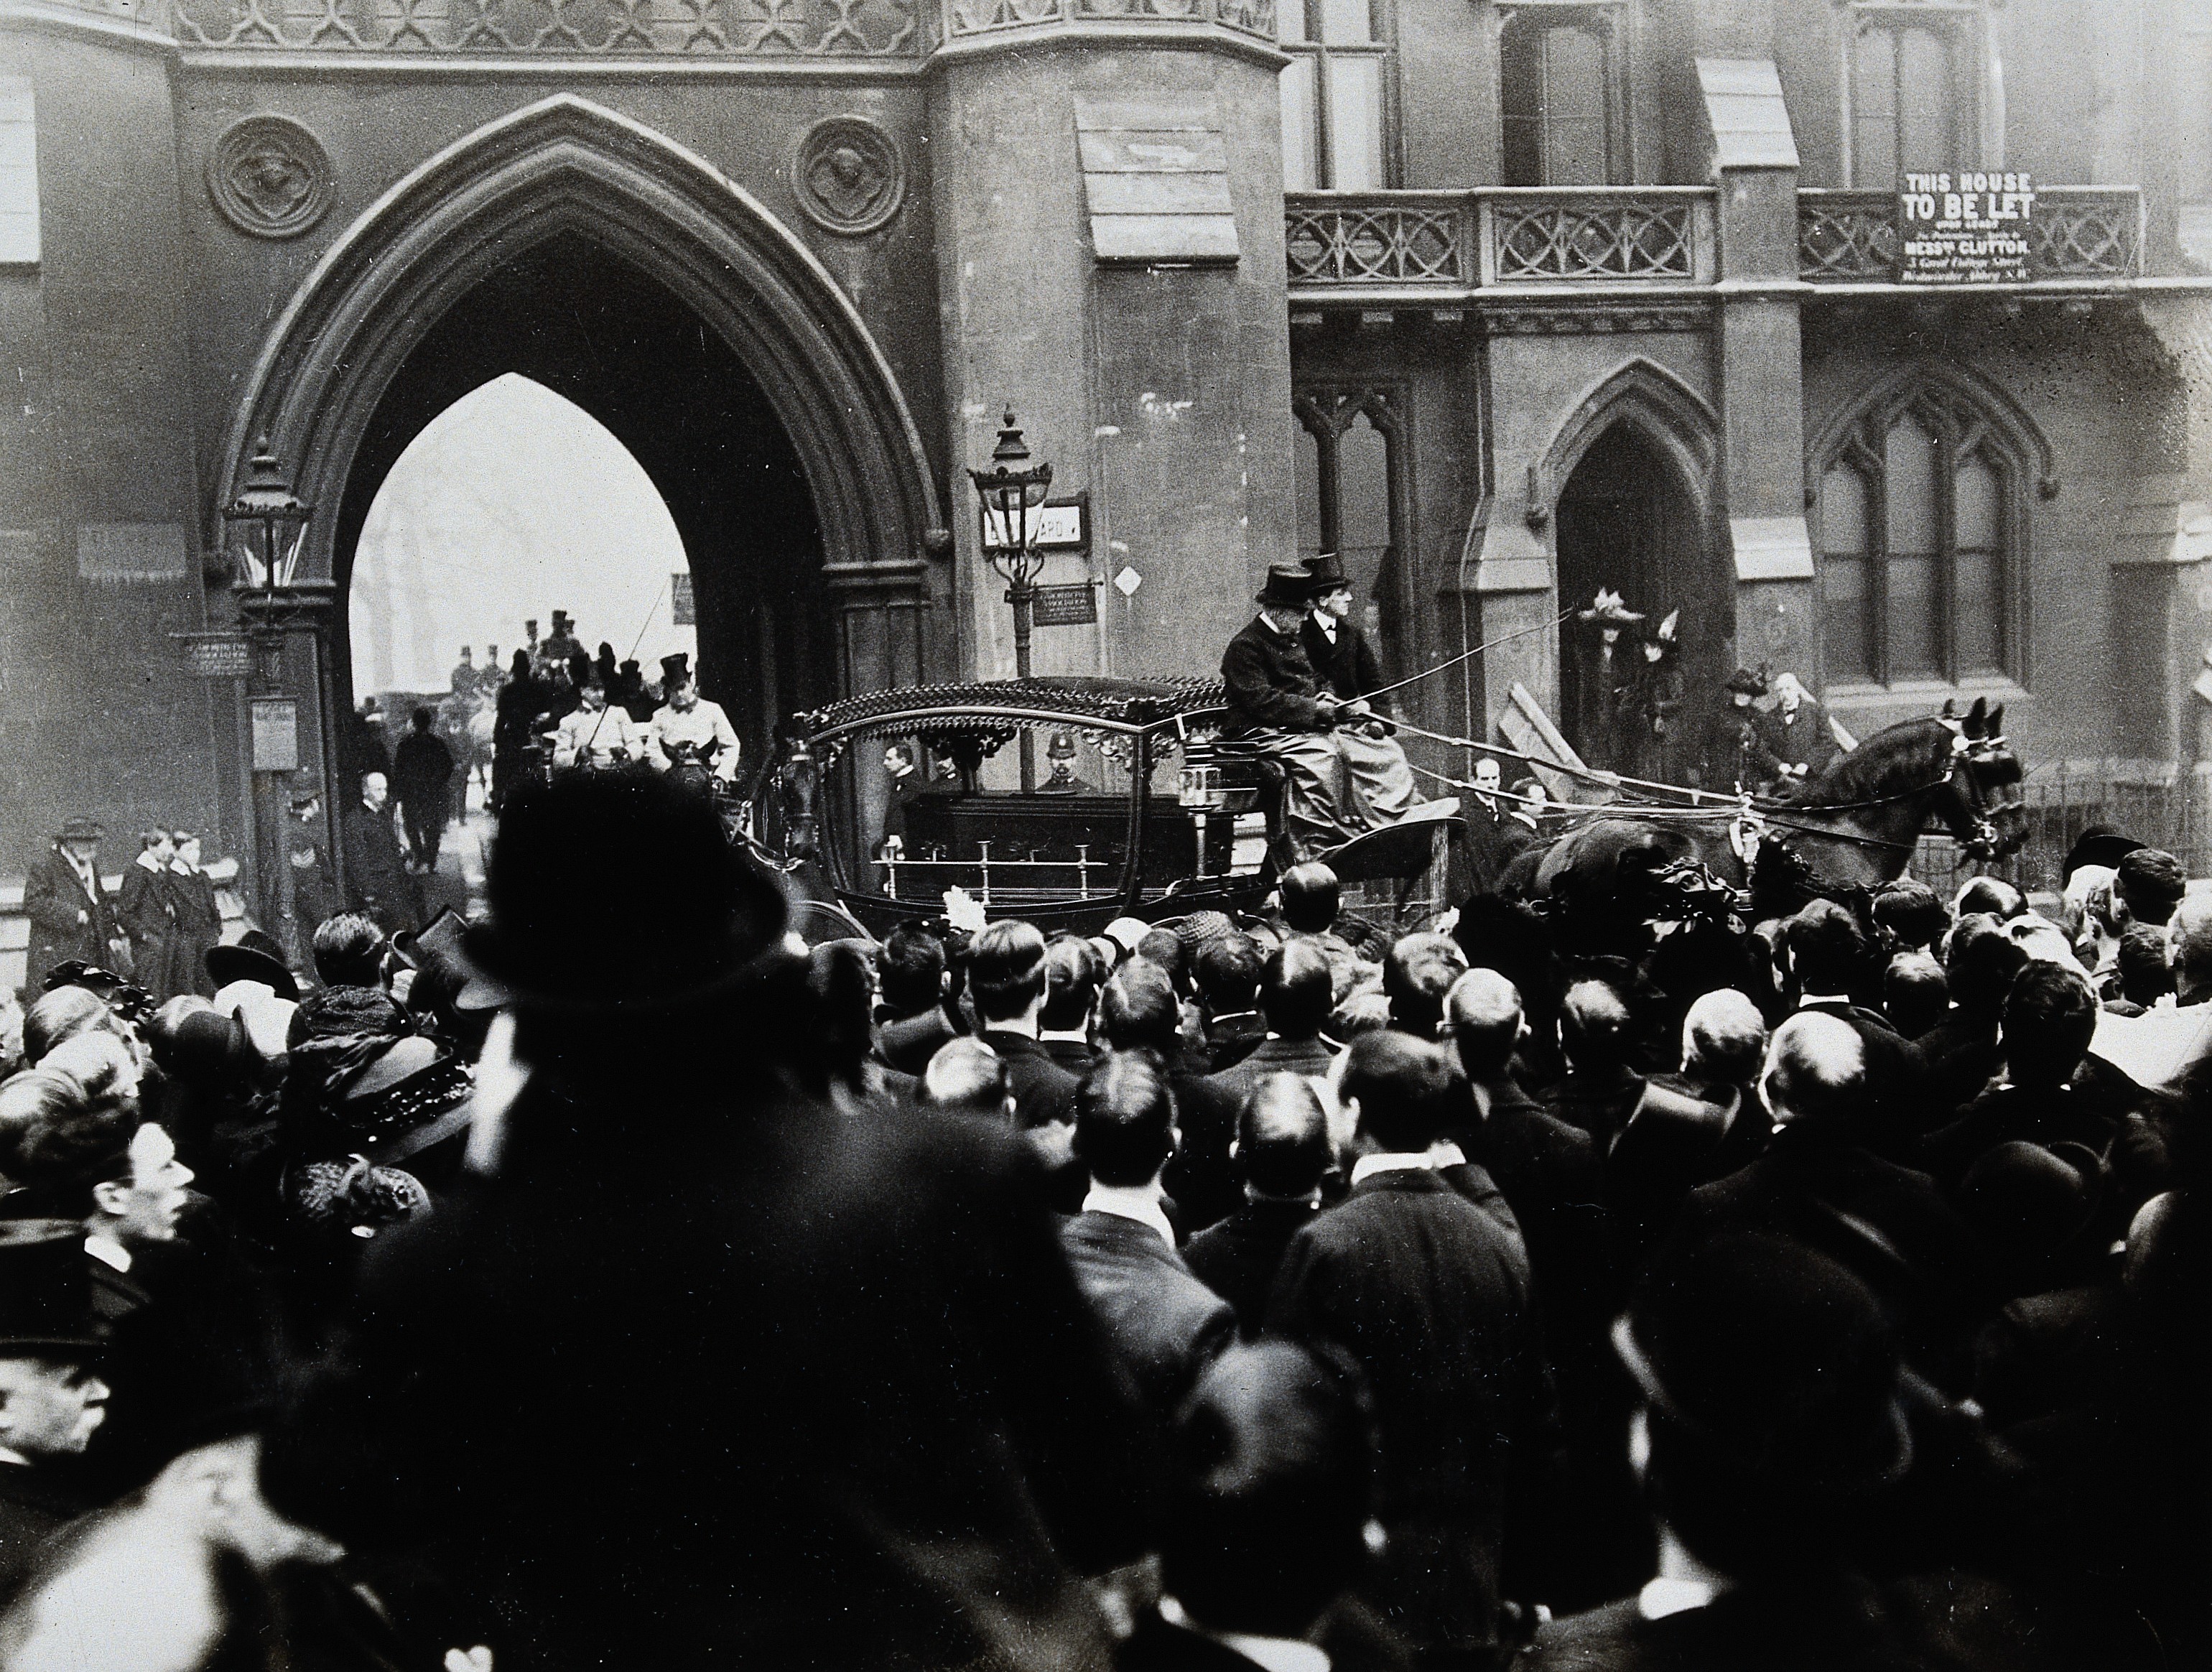 Joseph Lister, Baron Lister's funeral procession leaving Wes Wellcome V0027888